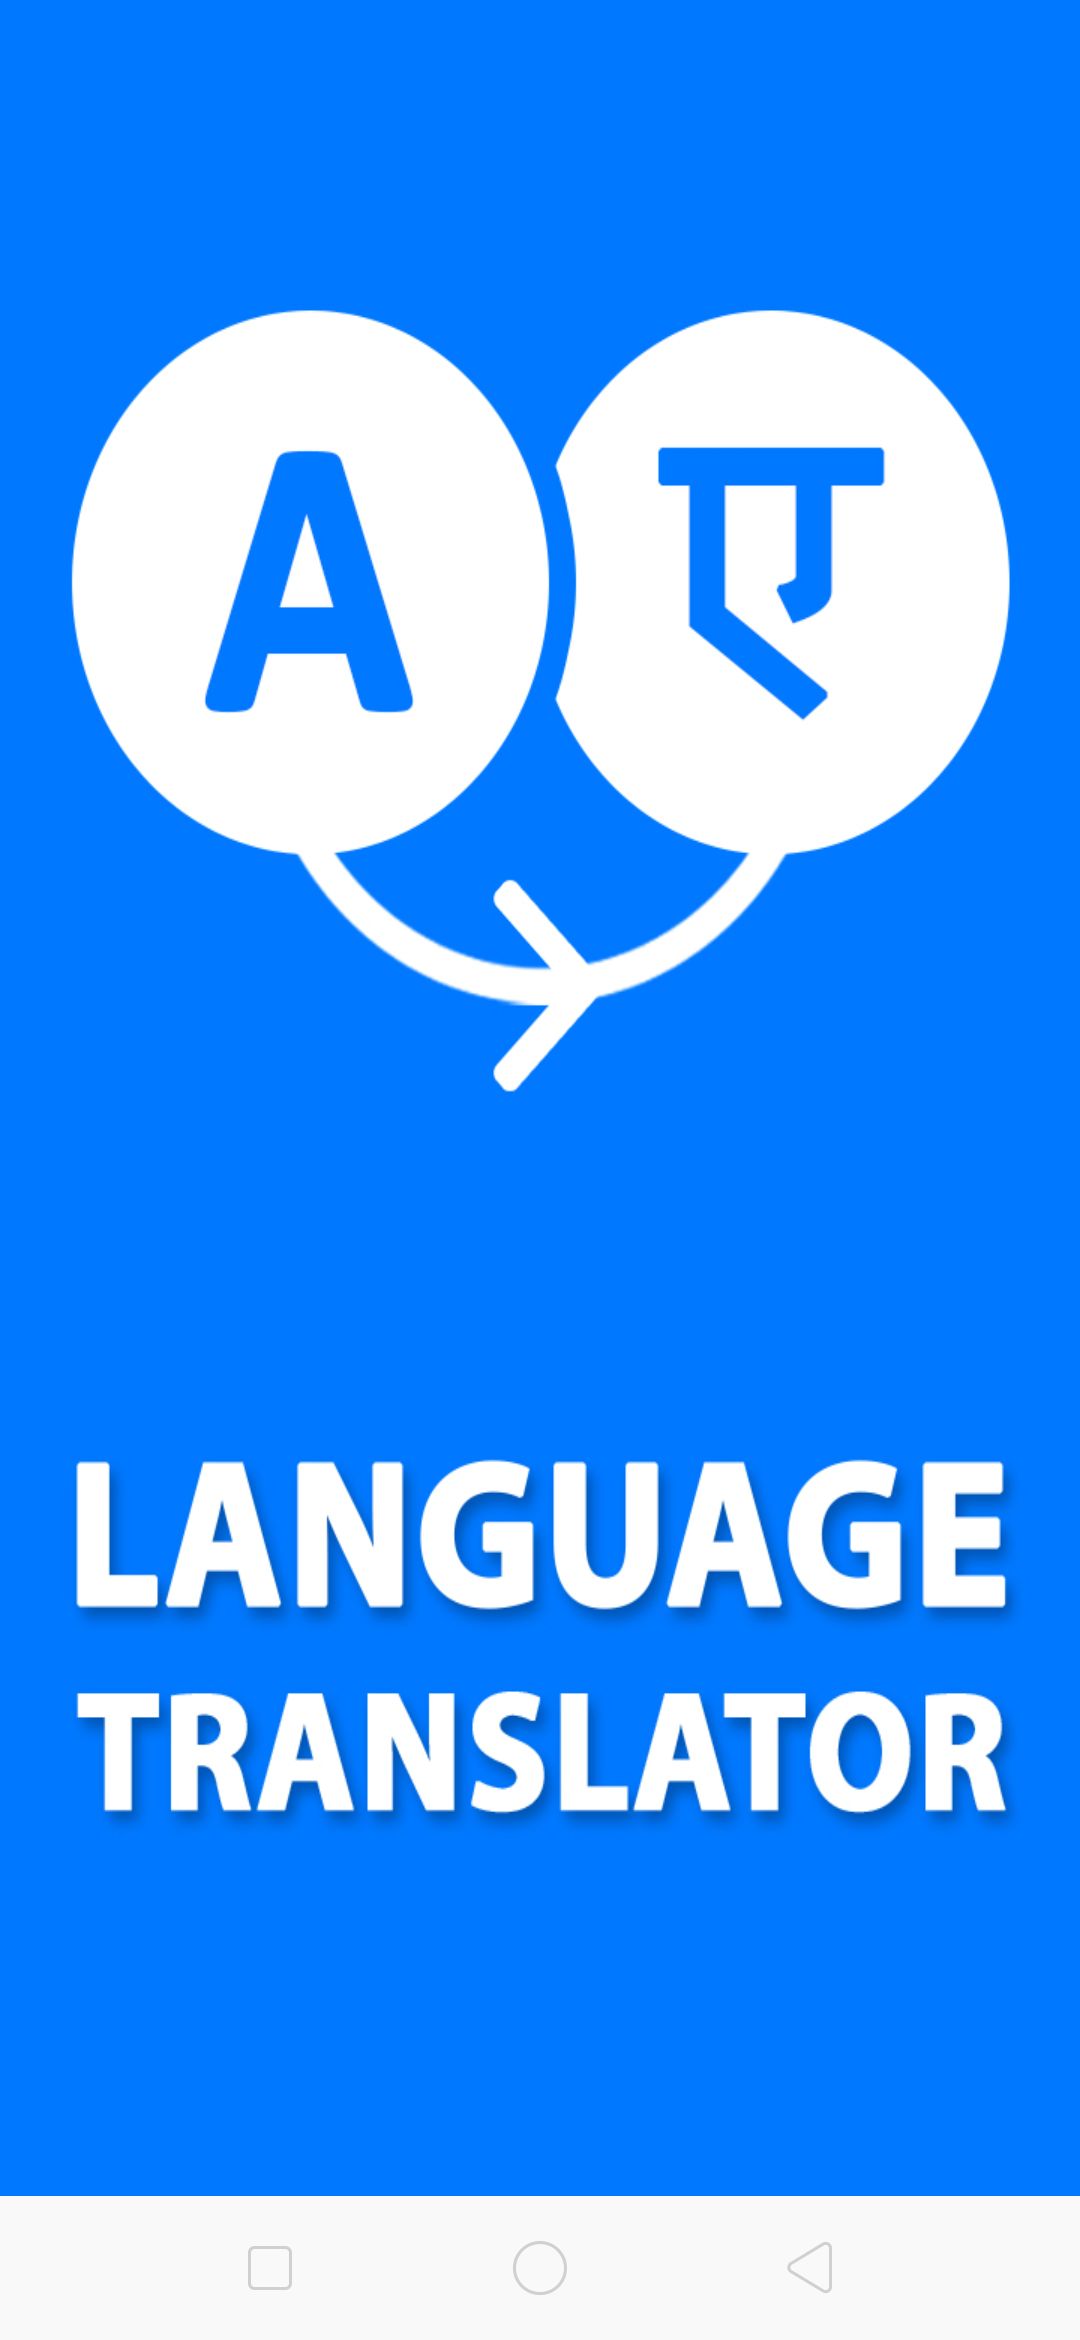 Language Translator Android Source Code by Anilpatel11 | Codester